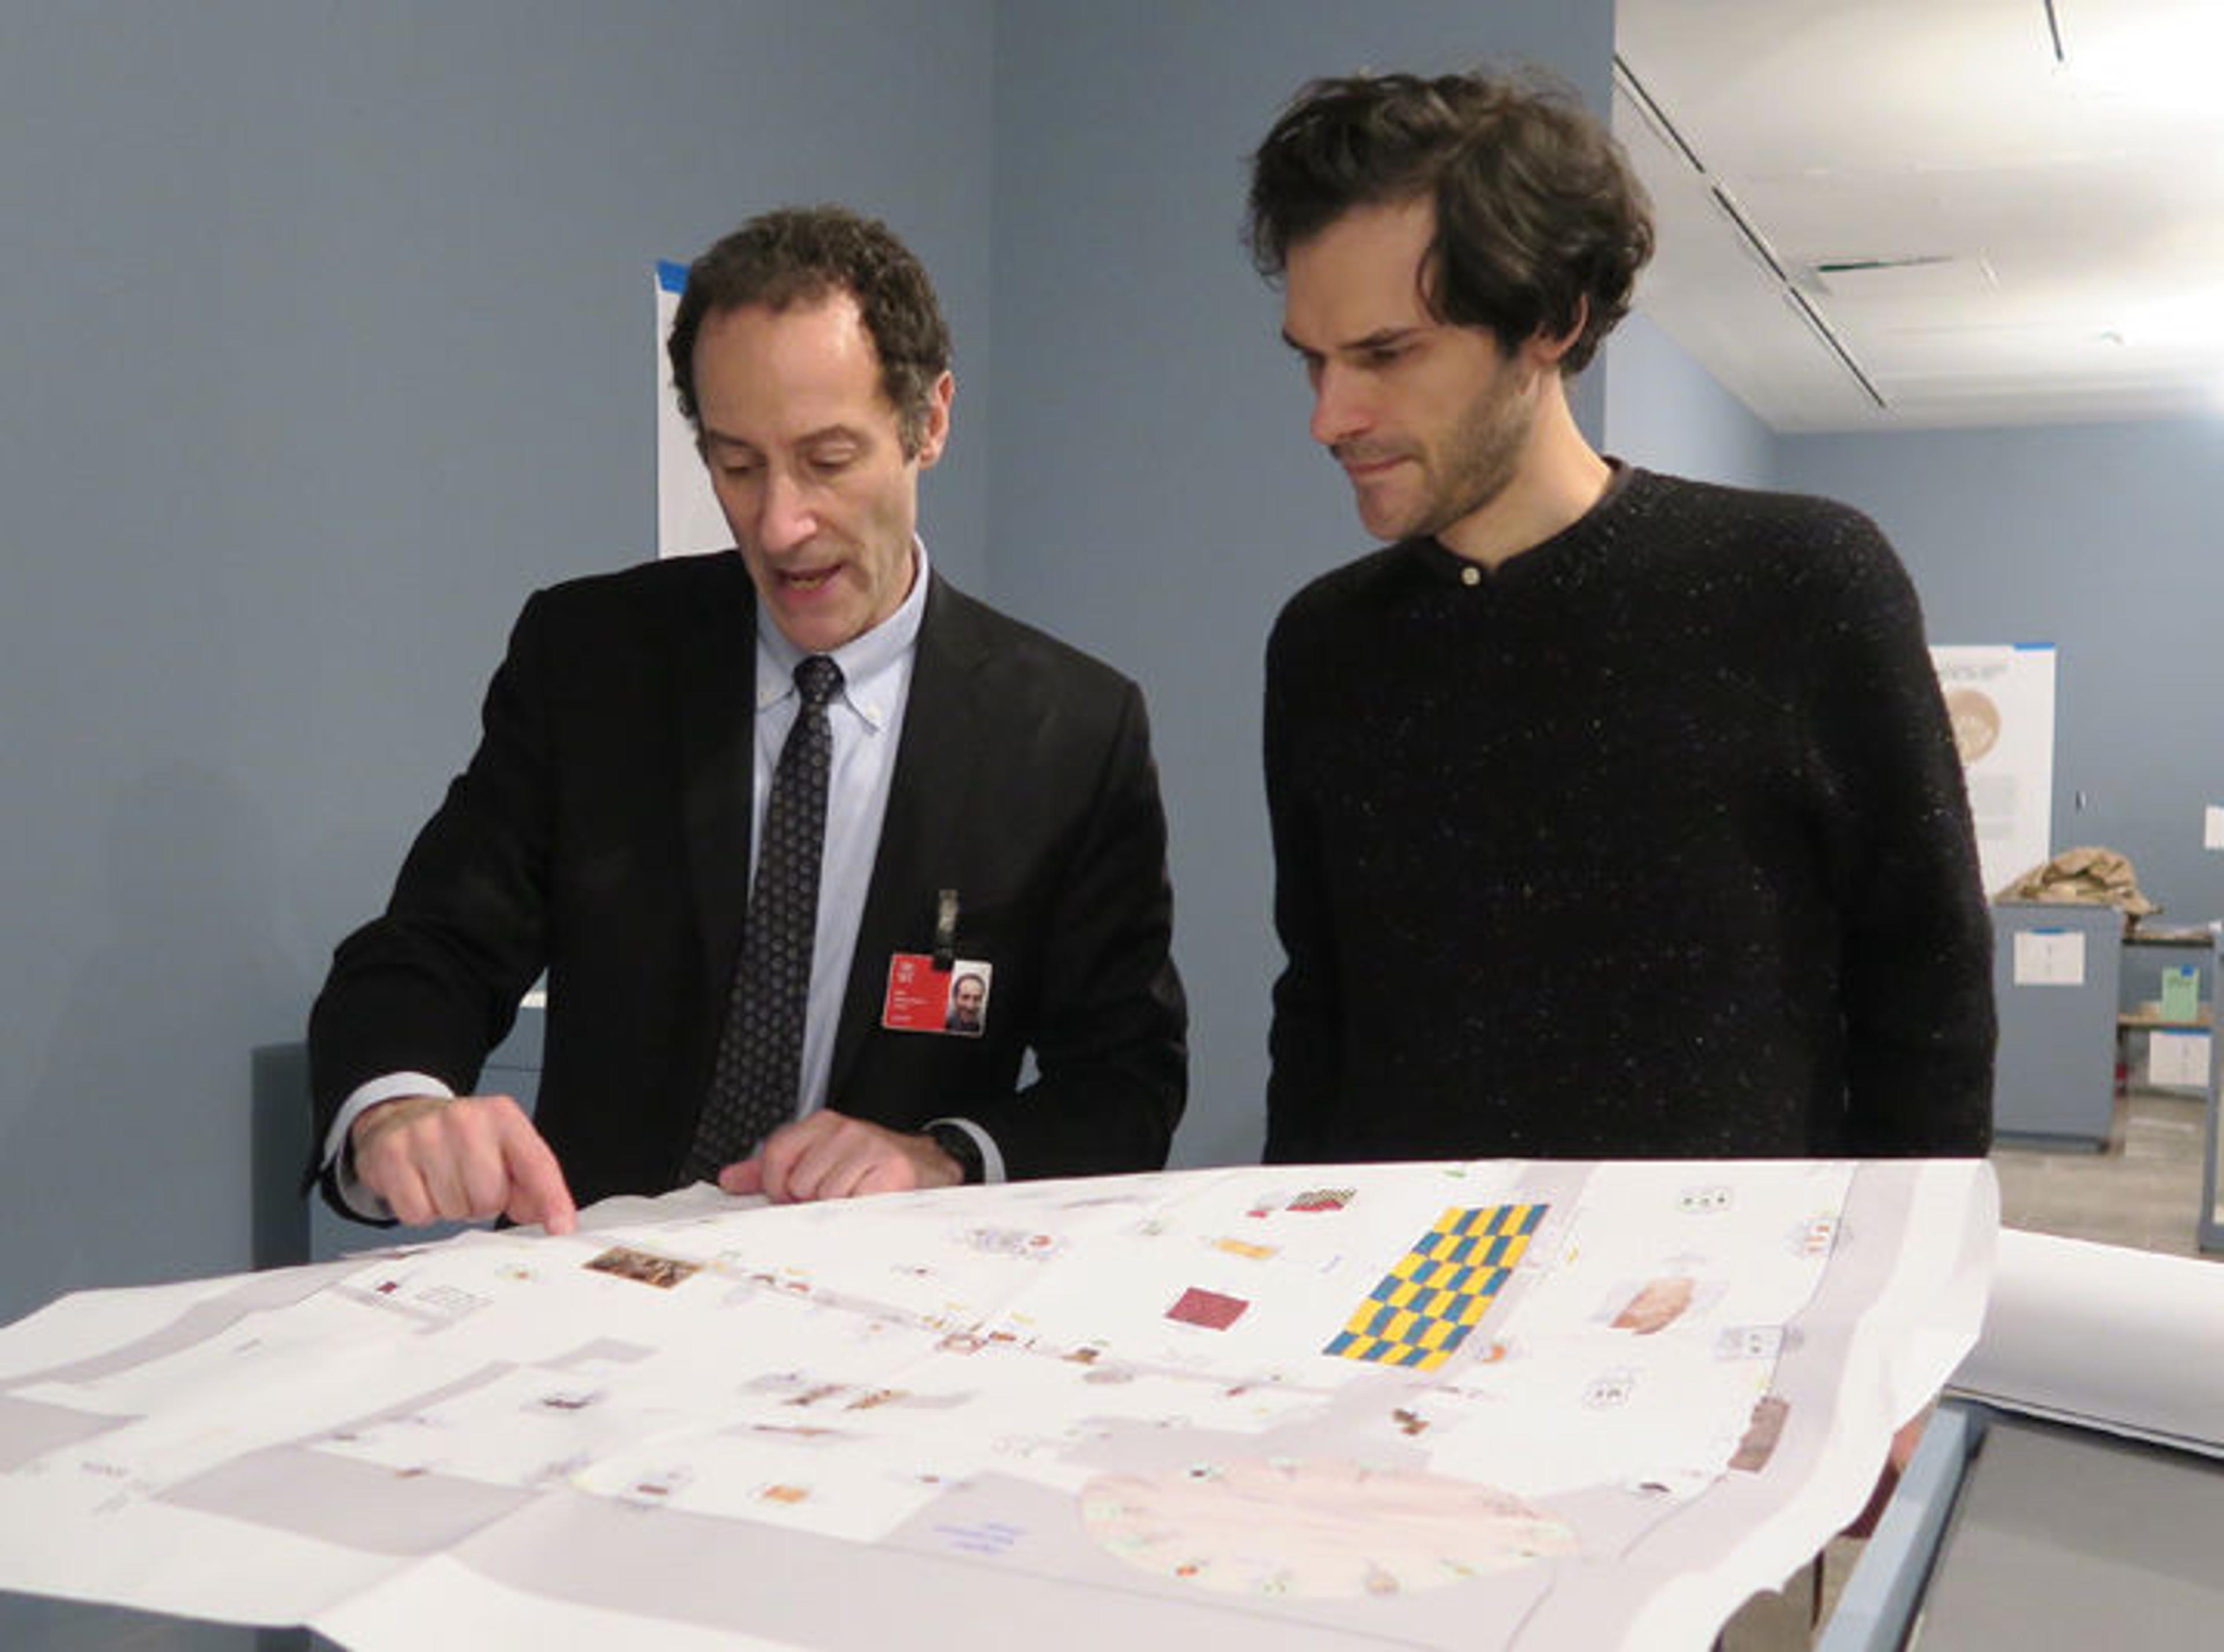 Two designers look at a floor plan for an exhibition gallery